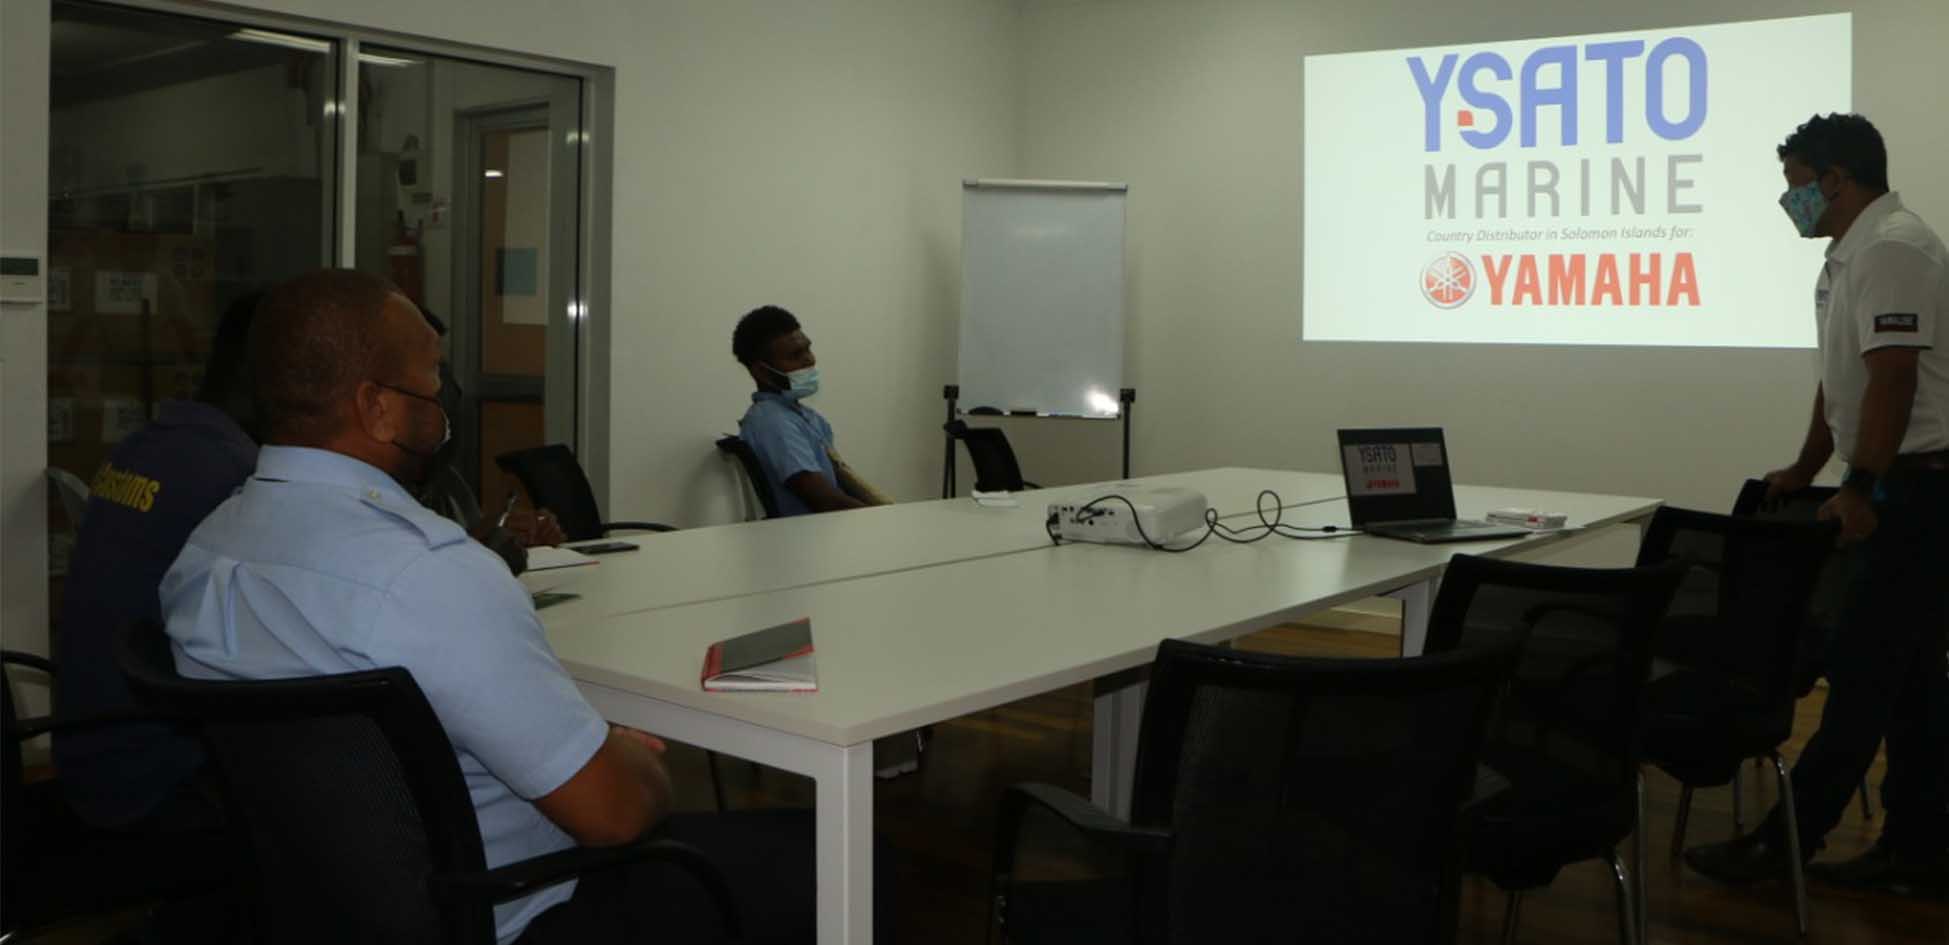 YSATO TRAINS CUSTOMS EXAMINERS IN YAMAHA TRADE MARK RECOGNITION AND SOLE DISTRIBUTOR RIGHTS